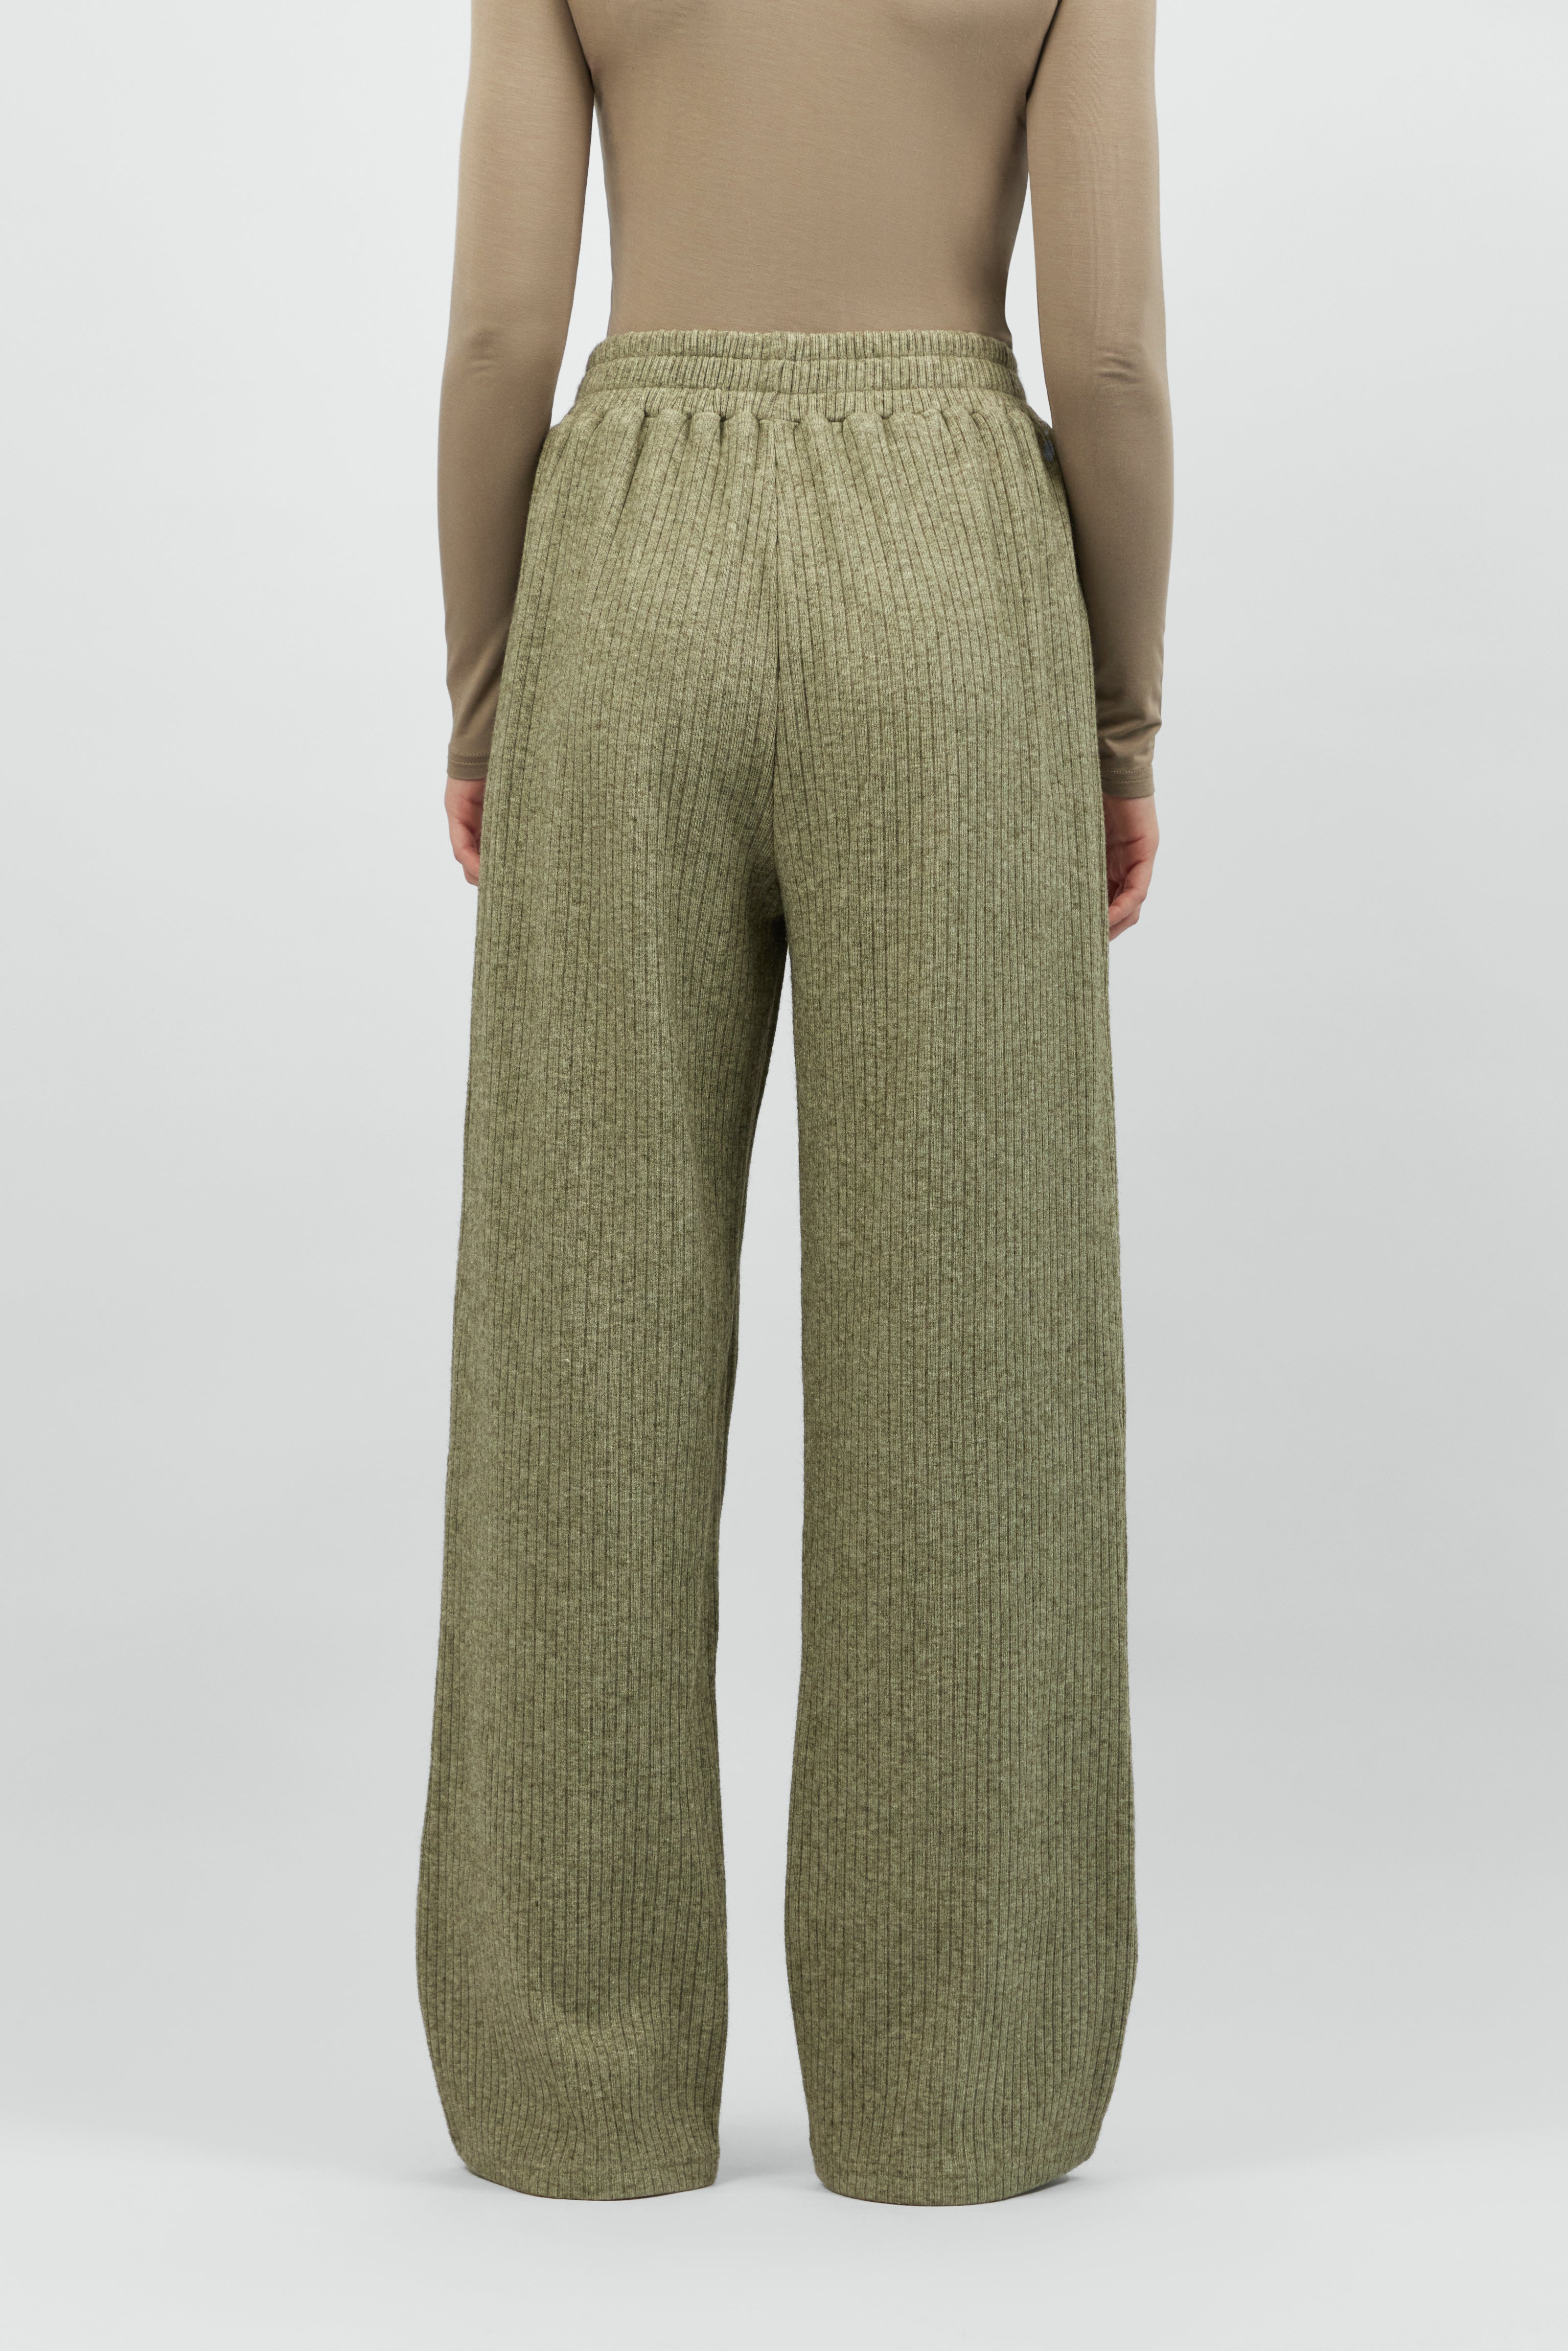 US - Knit Relaxed Fit Pants - Olive